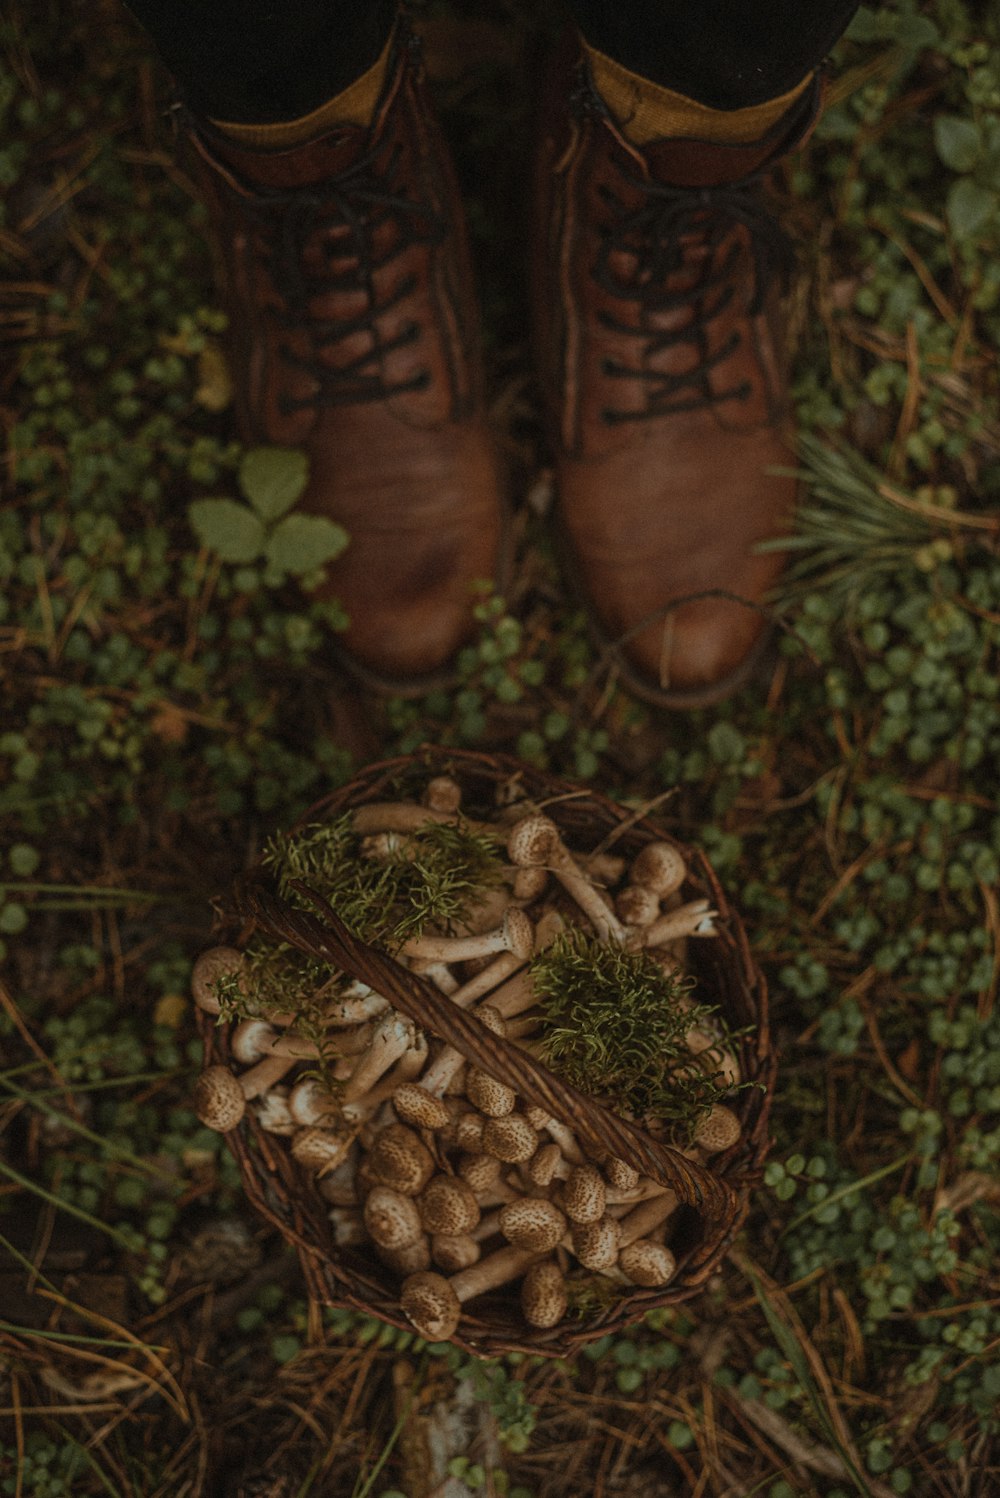 a person's feet in boots with pine cones on them